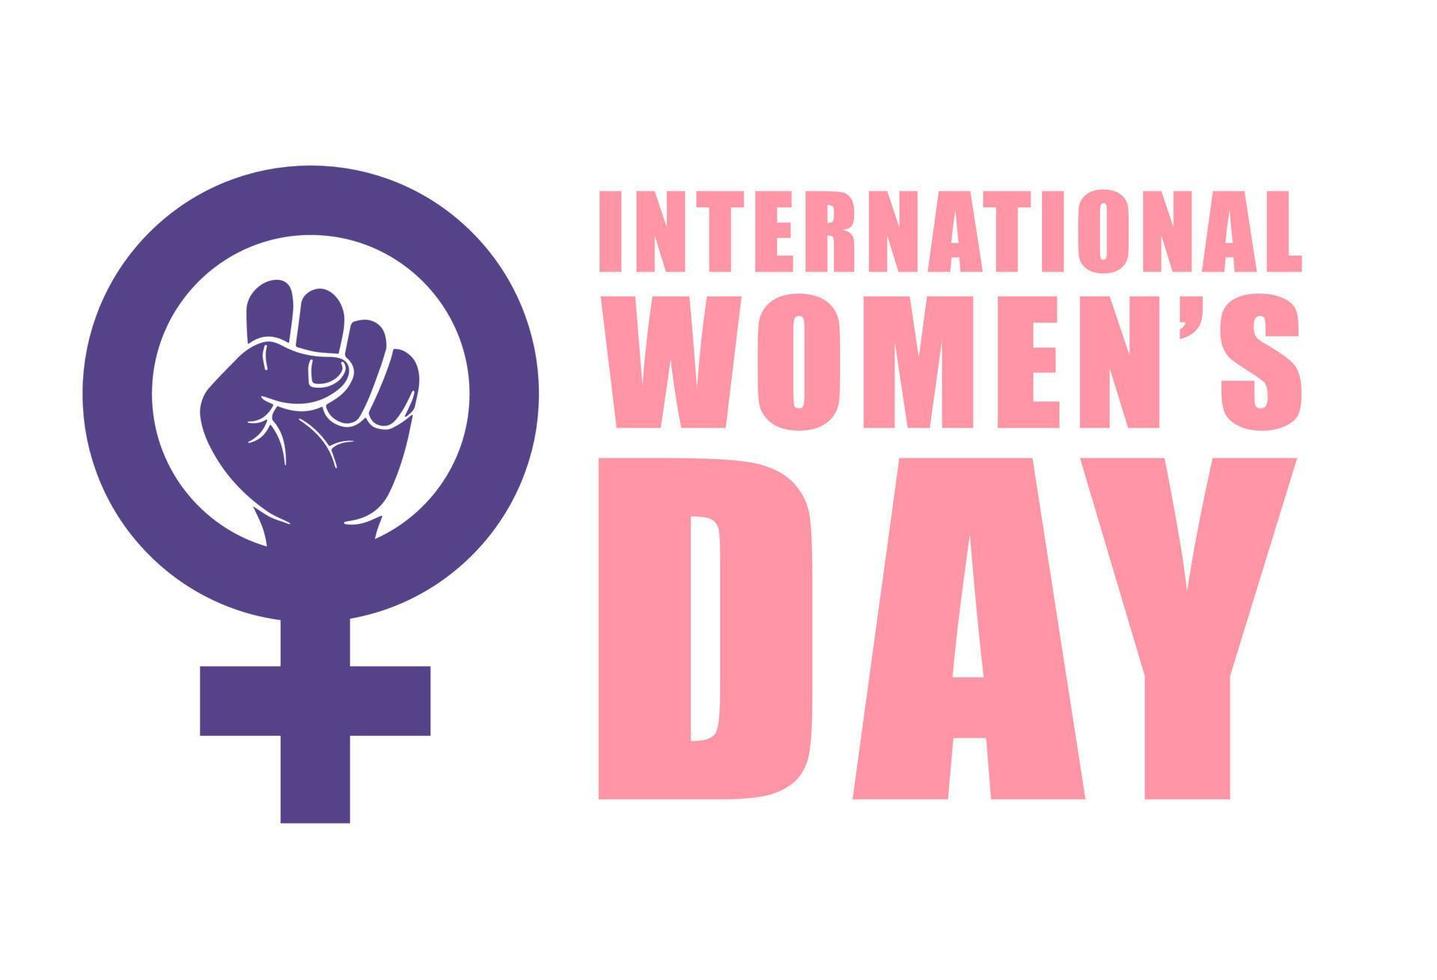 Women's day fist with text lettering vector illustration